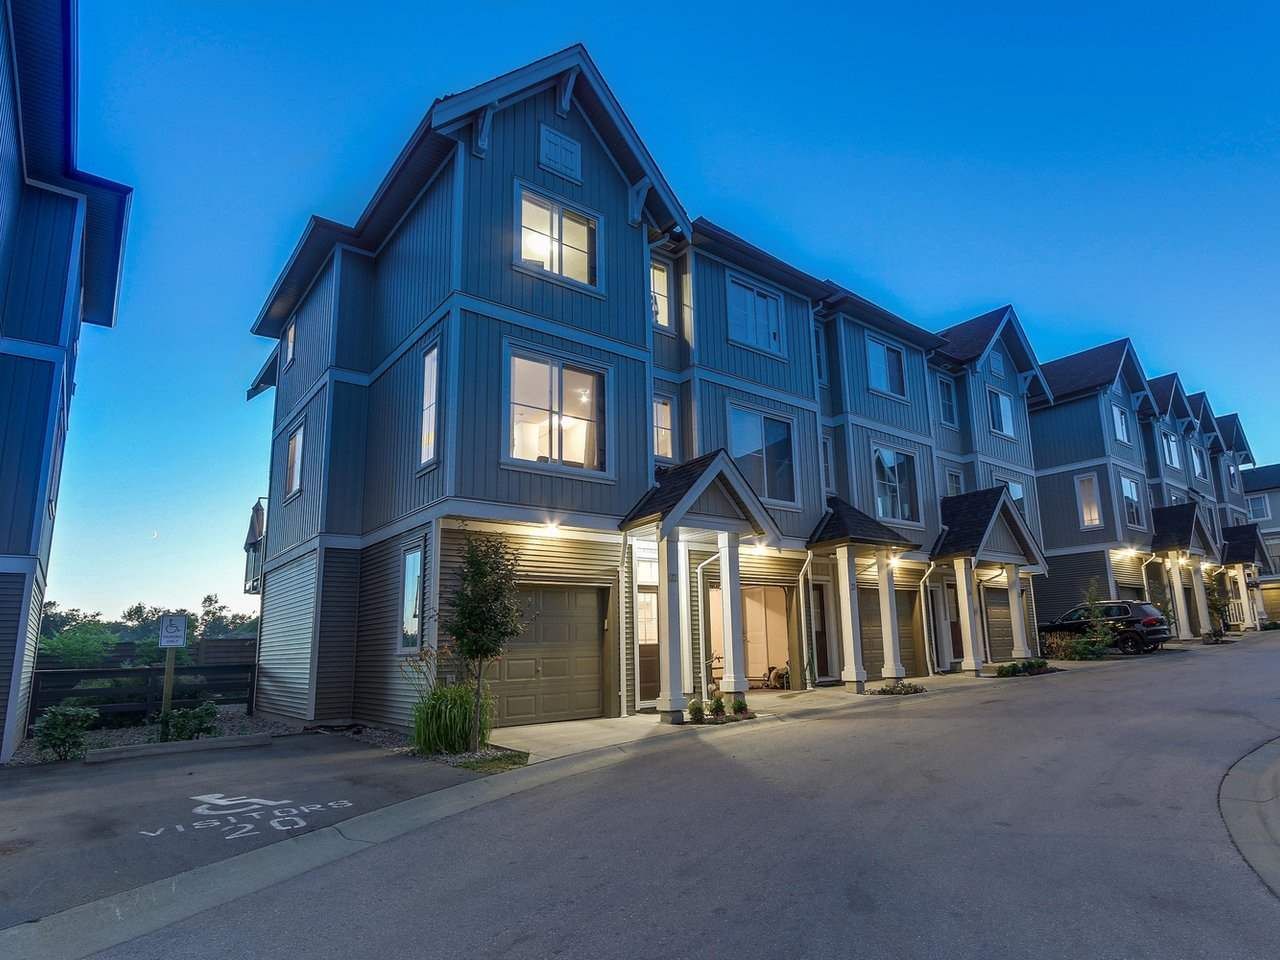 Main Photo: 72 31032 WESTRIDGE PLACE in : Abbotsford West Townhouse for sale : MLS®# R2192336